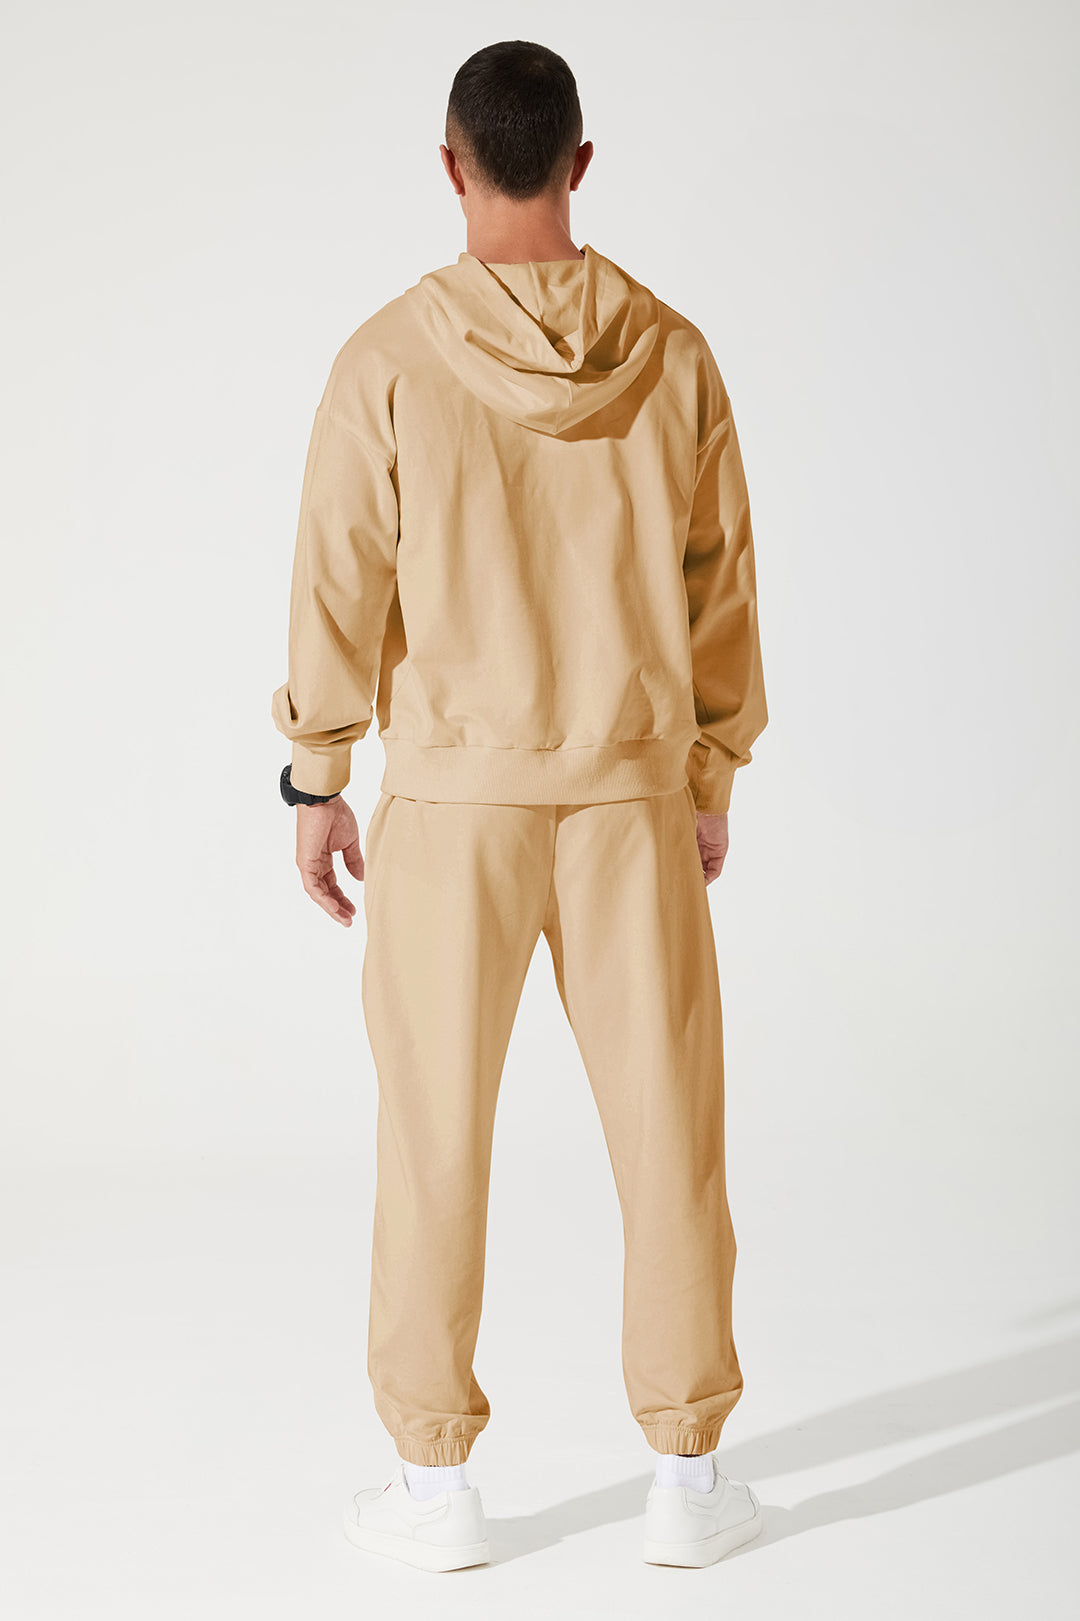 Stylish men's cappuccino beige hoodie with a cropped design - OW-0033-MHO-BG_4.jpg